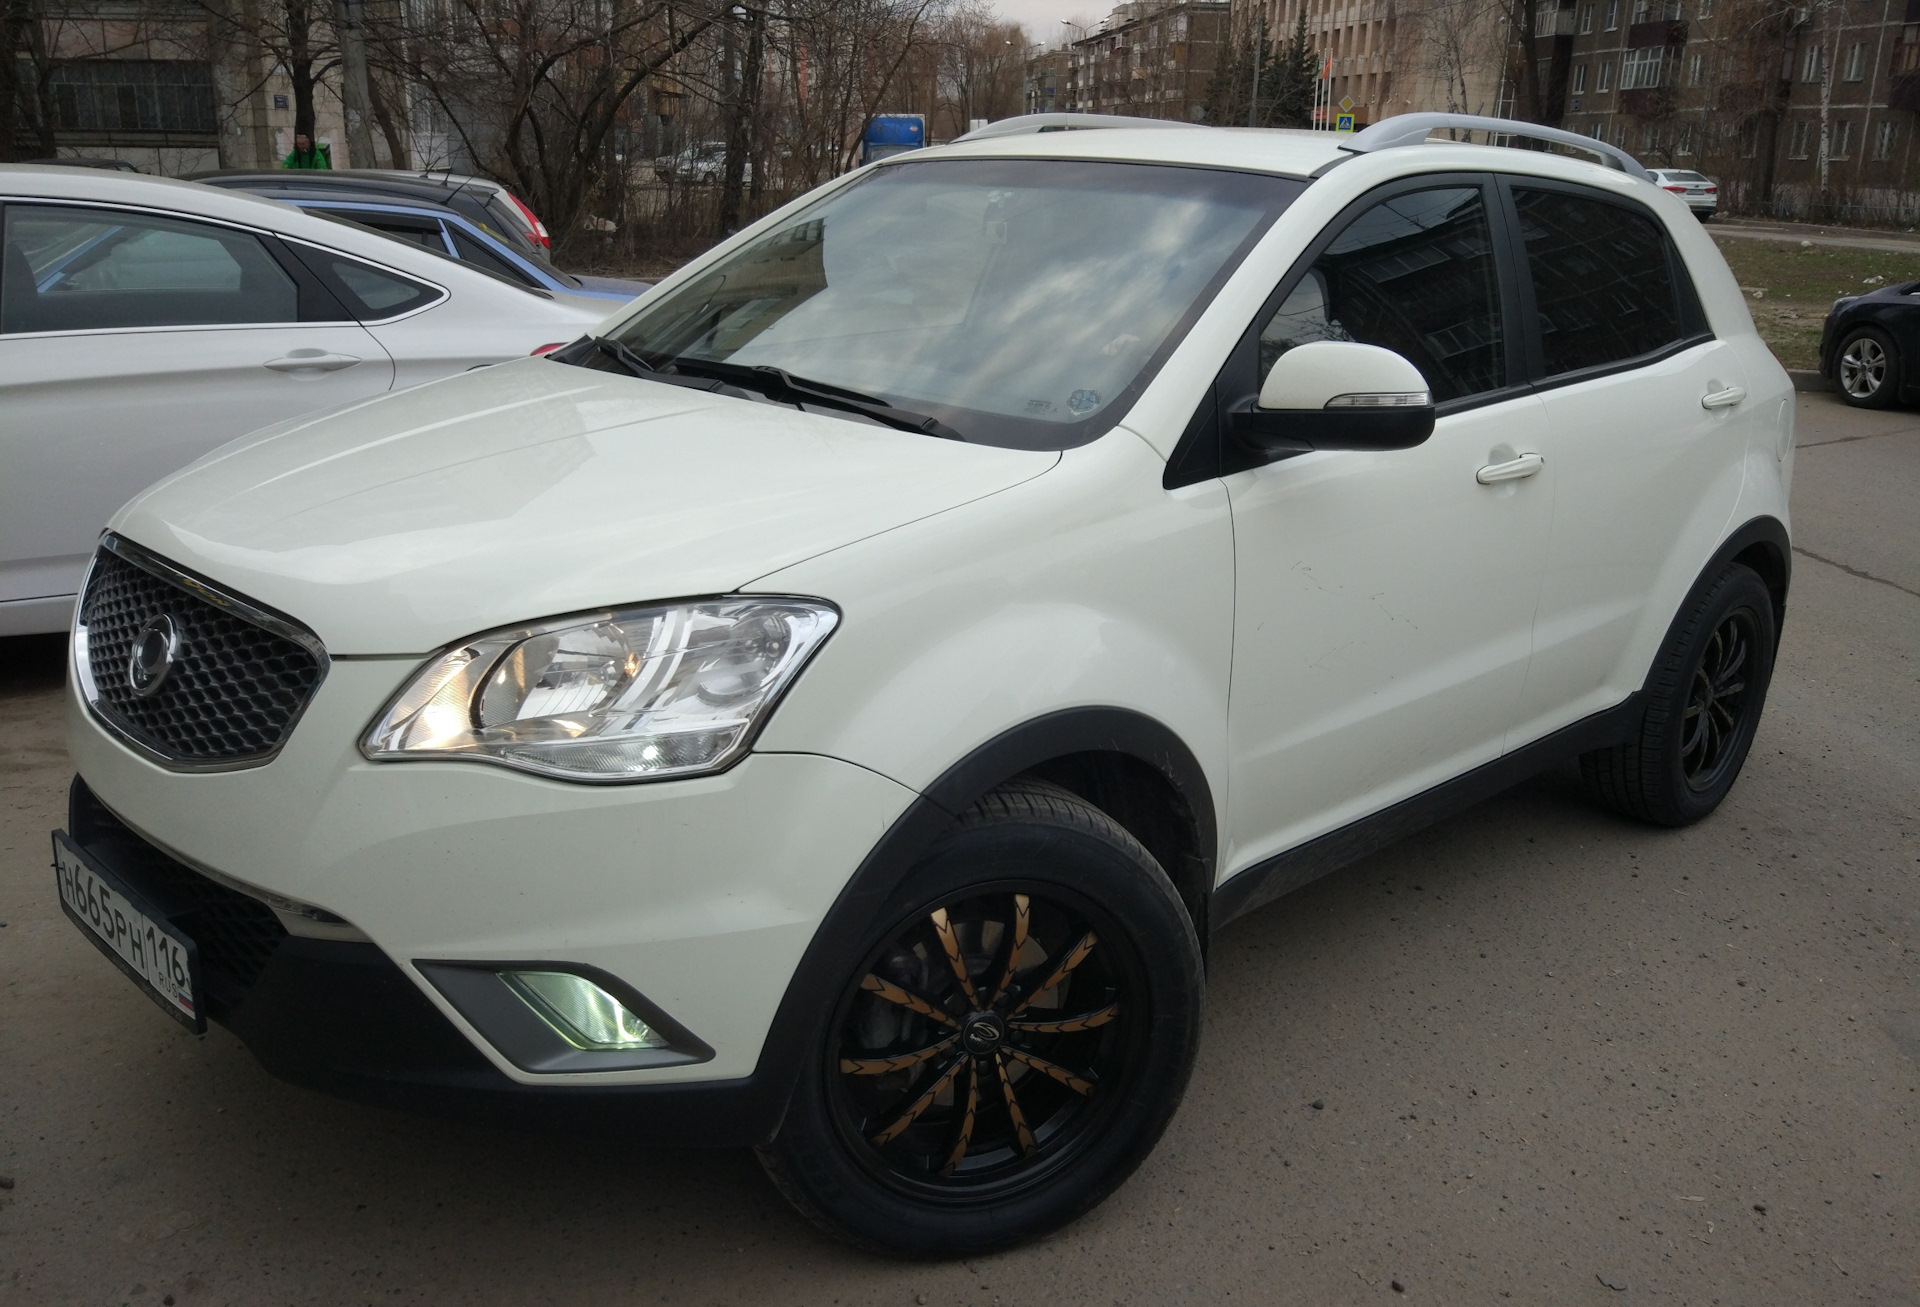 225/55 R18 зима SSANGYONG Actyon. SSANGYONG Actyon New диски. Актион Нью белый на литье. SSANGYONG Actyon 2009.